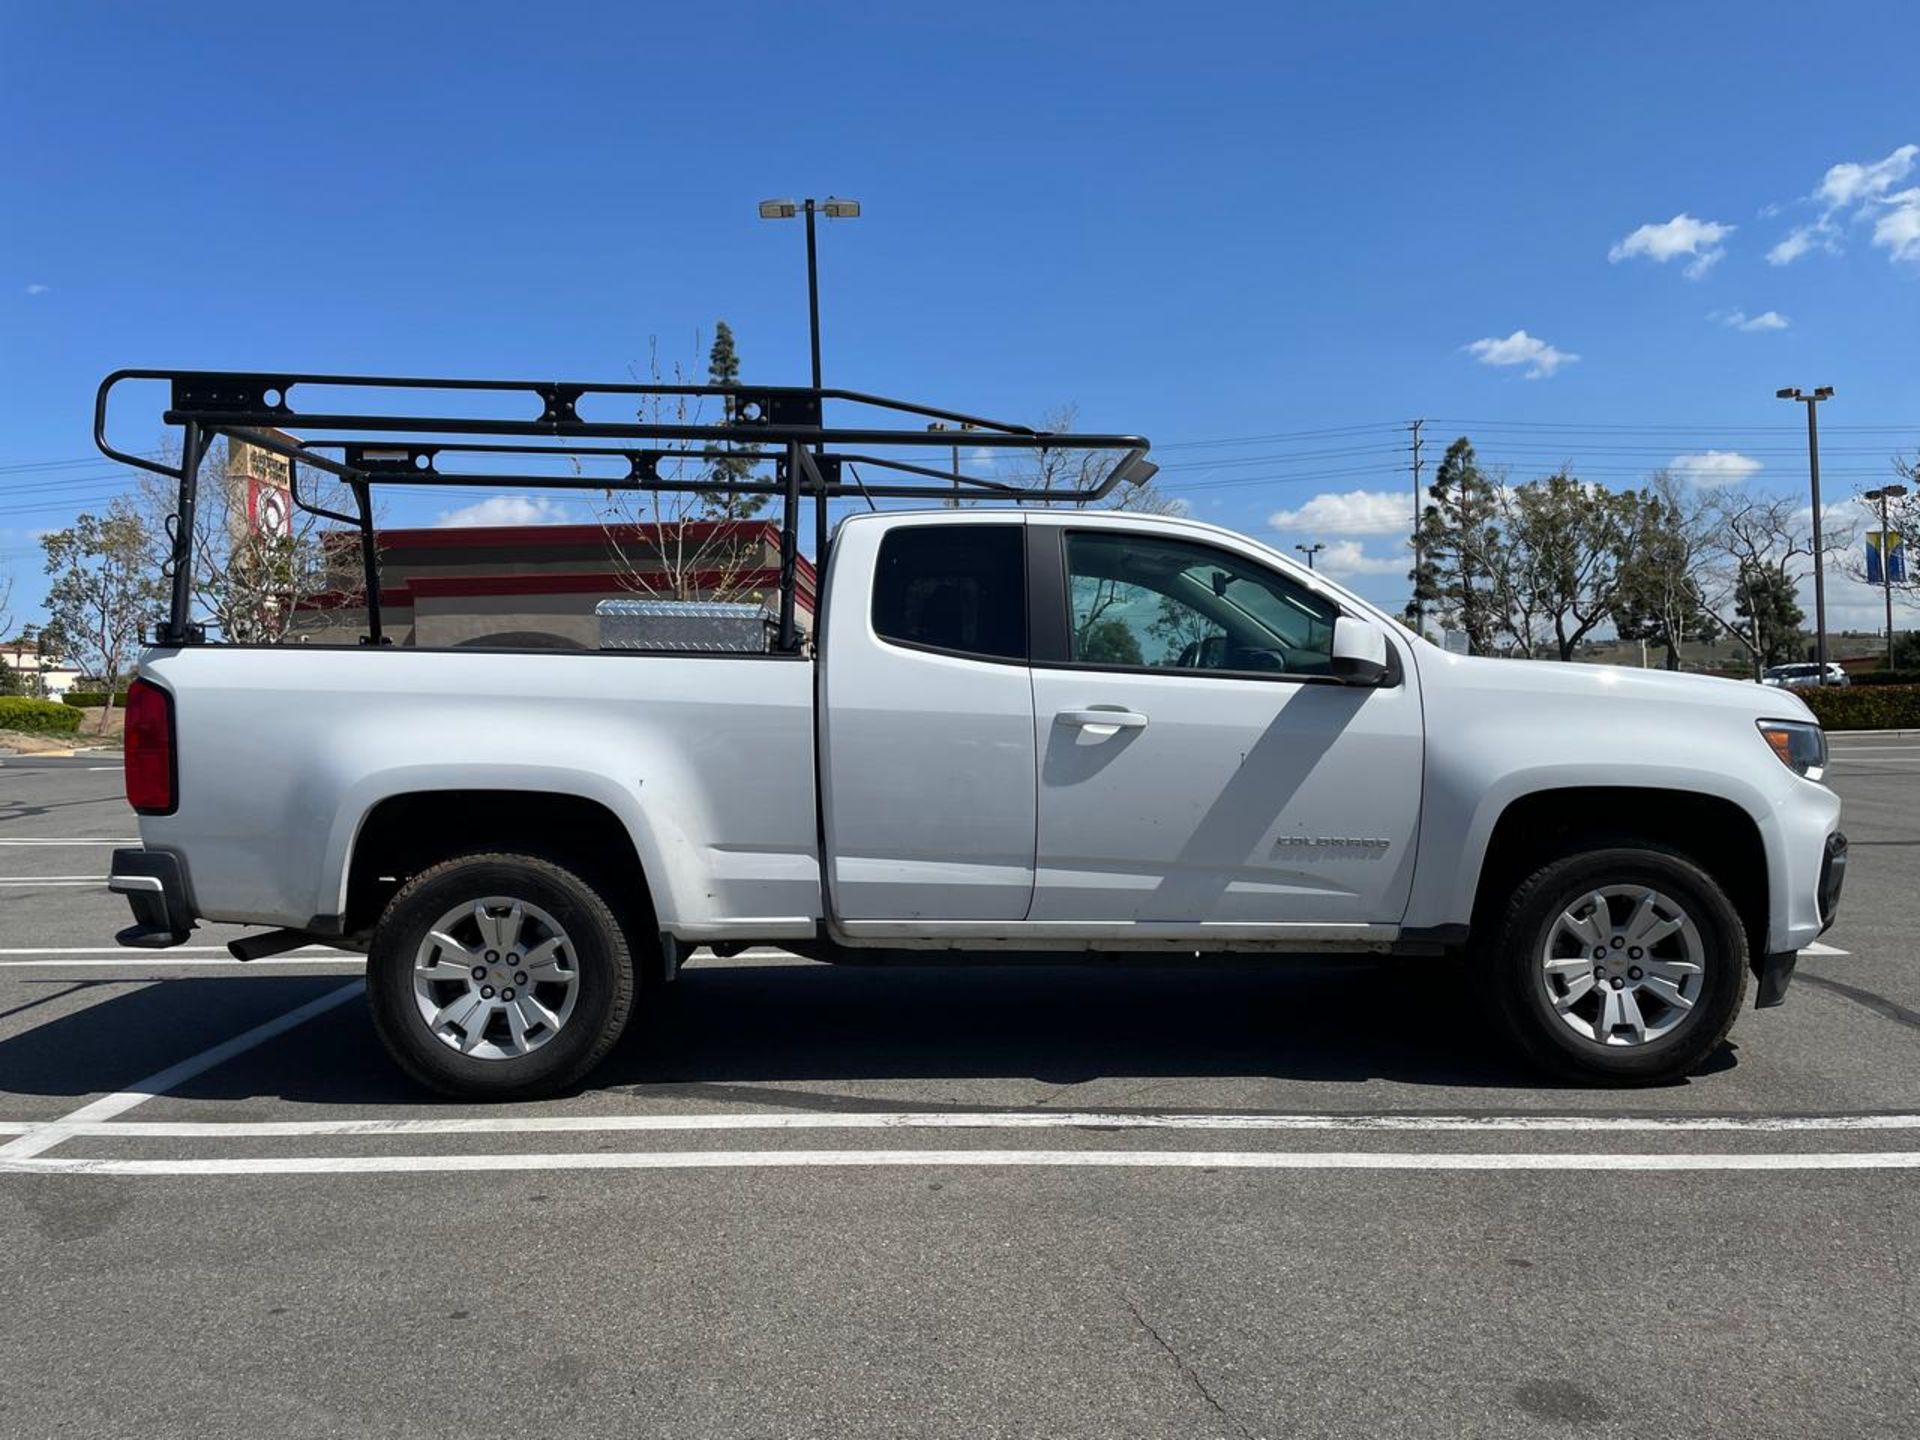 2022 Chevrolet Colorado LT Extended Cab 4x2 Pickup Truck - Image 7 of 23